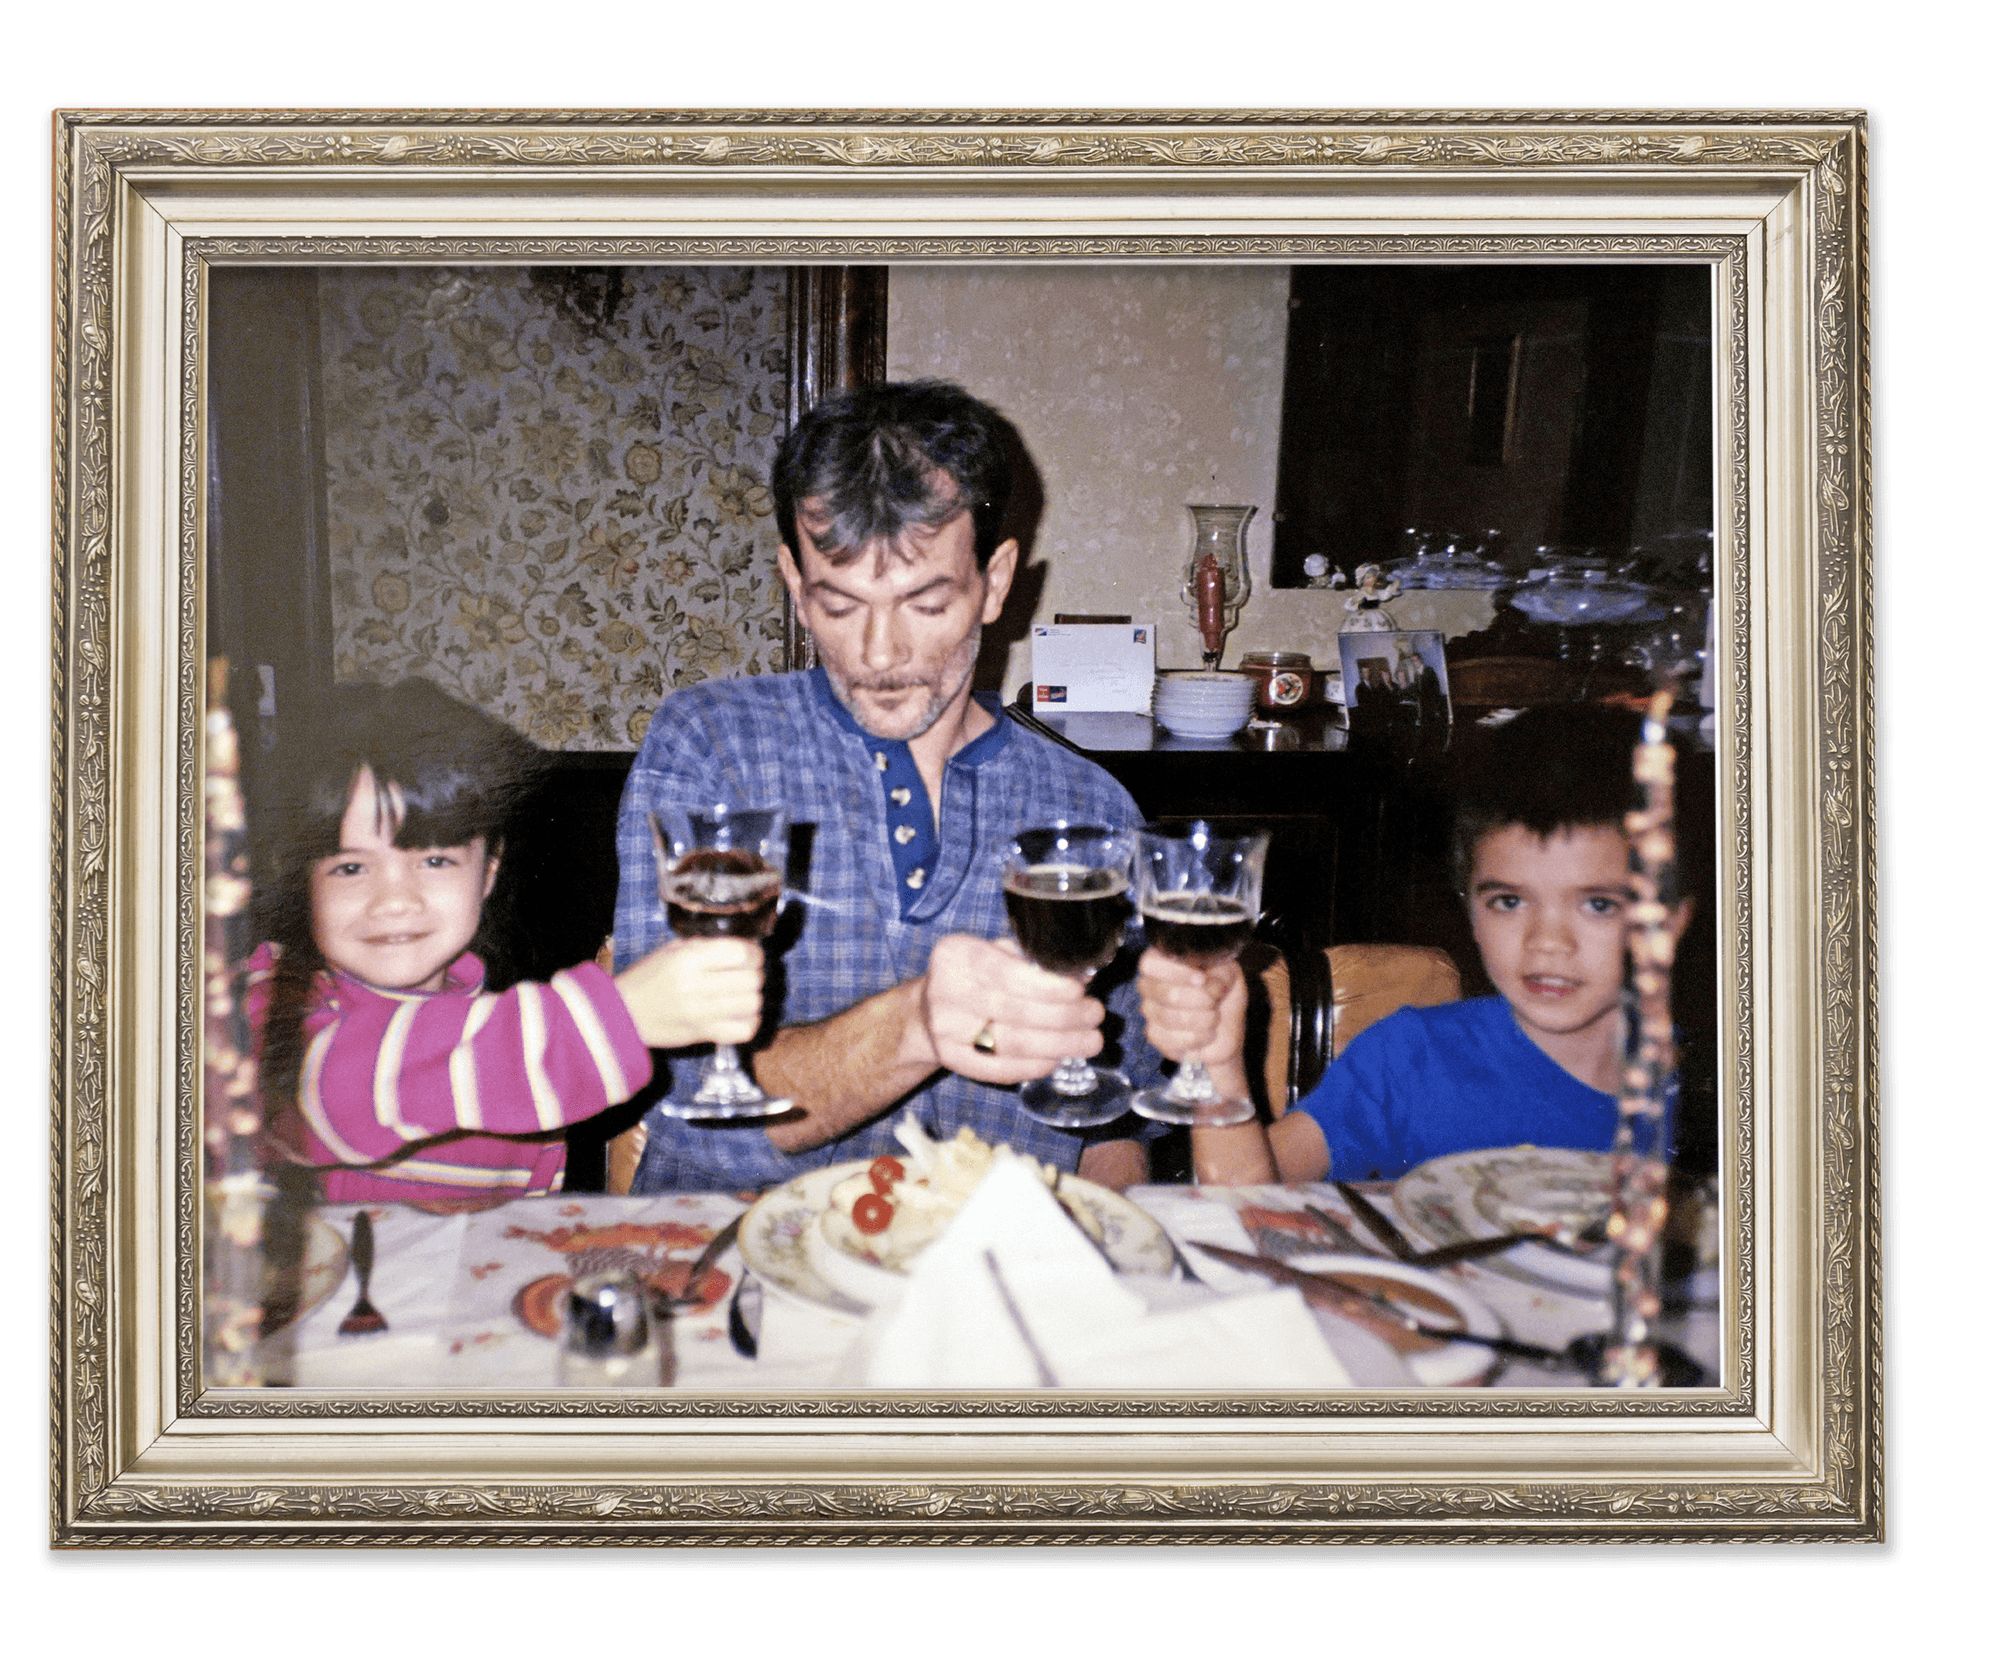 Amanda (left) and James celebrate Thanksgiving with their father, James Patrick Logue Jr., at the Dartmouth Street home in the ‘90s.